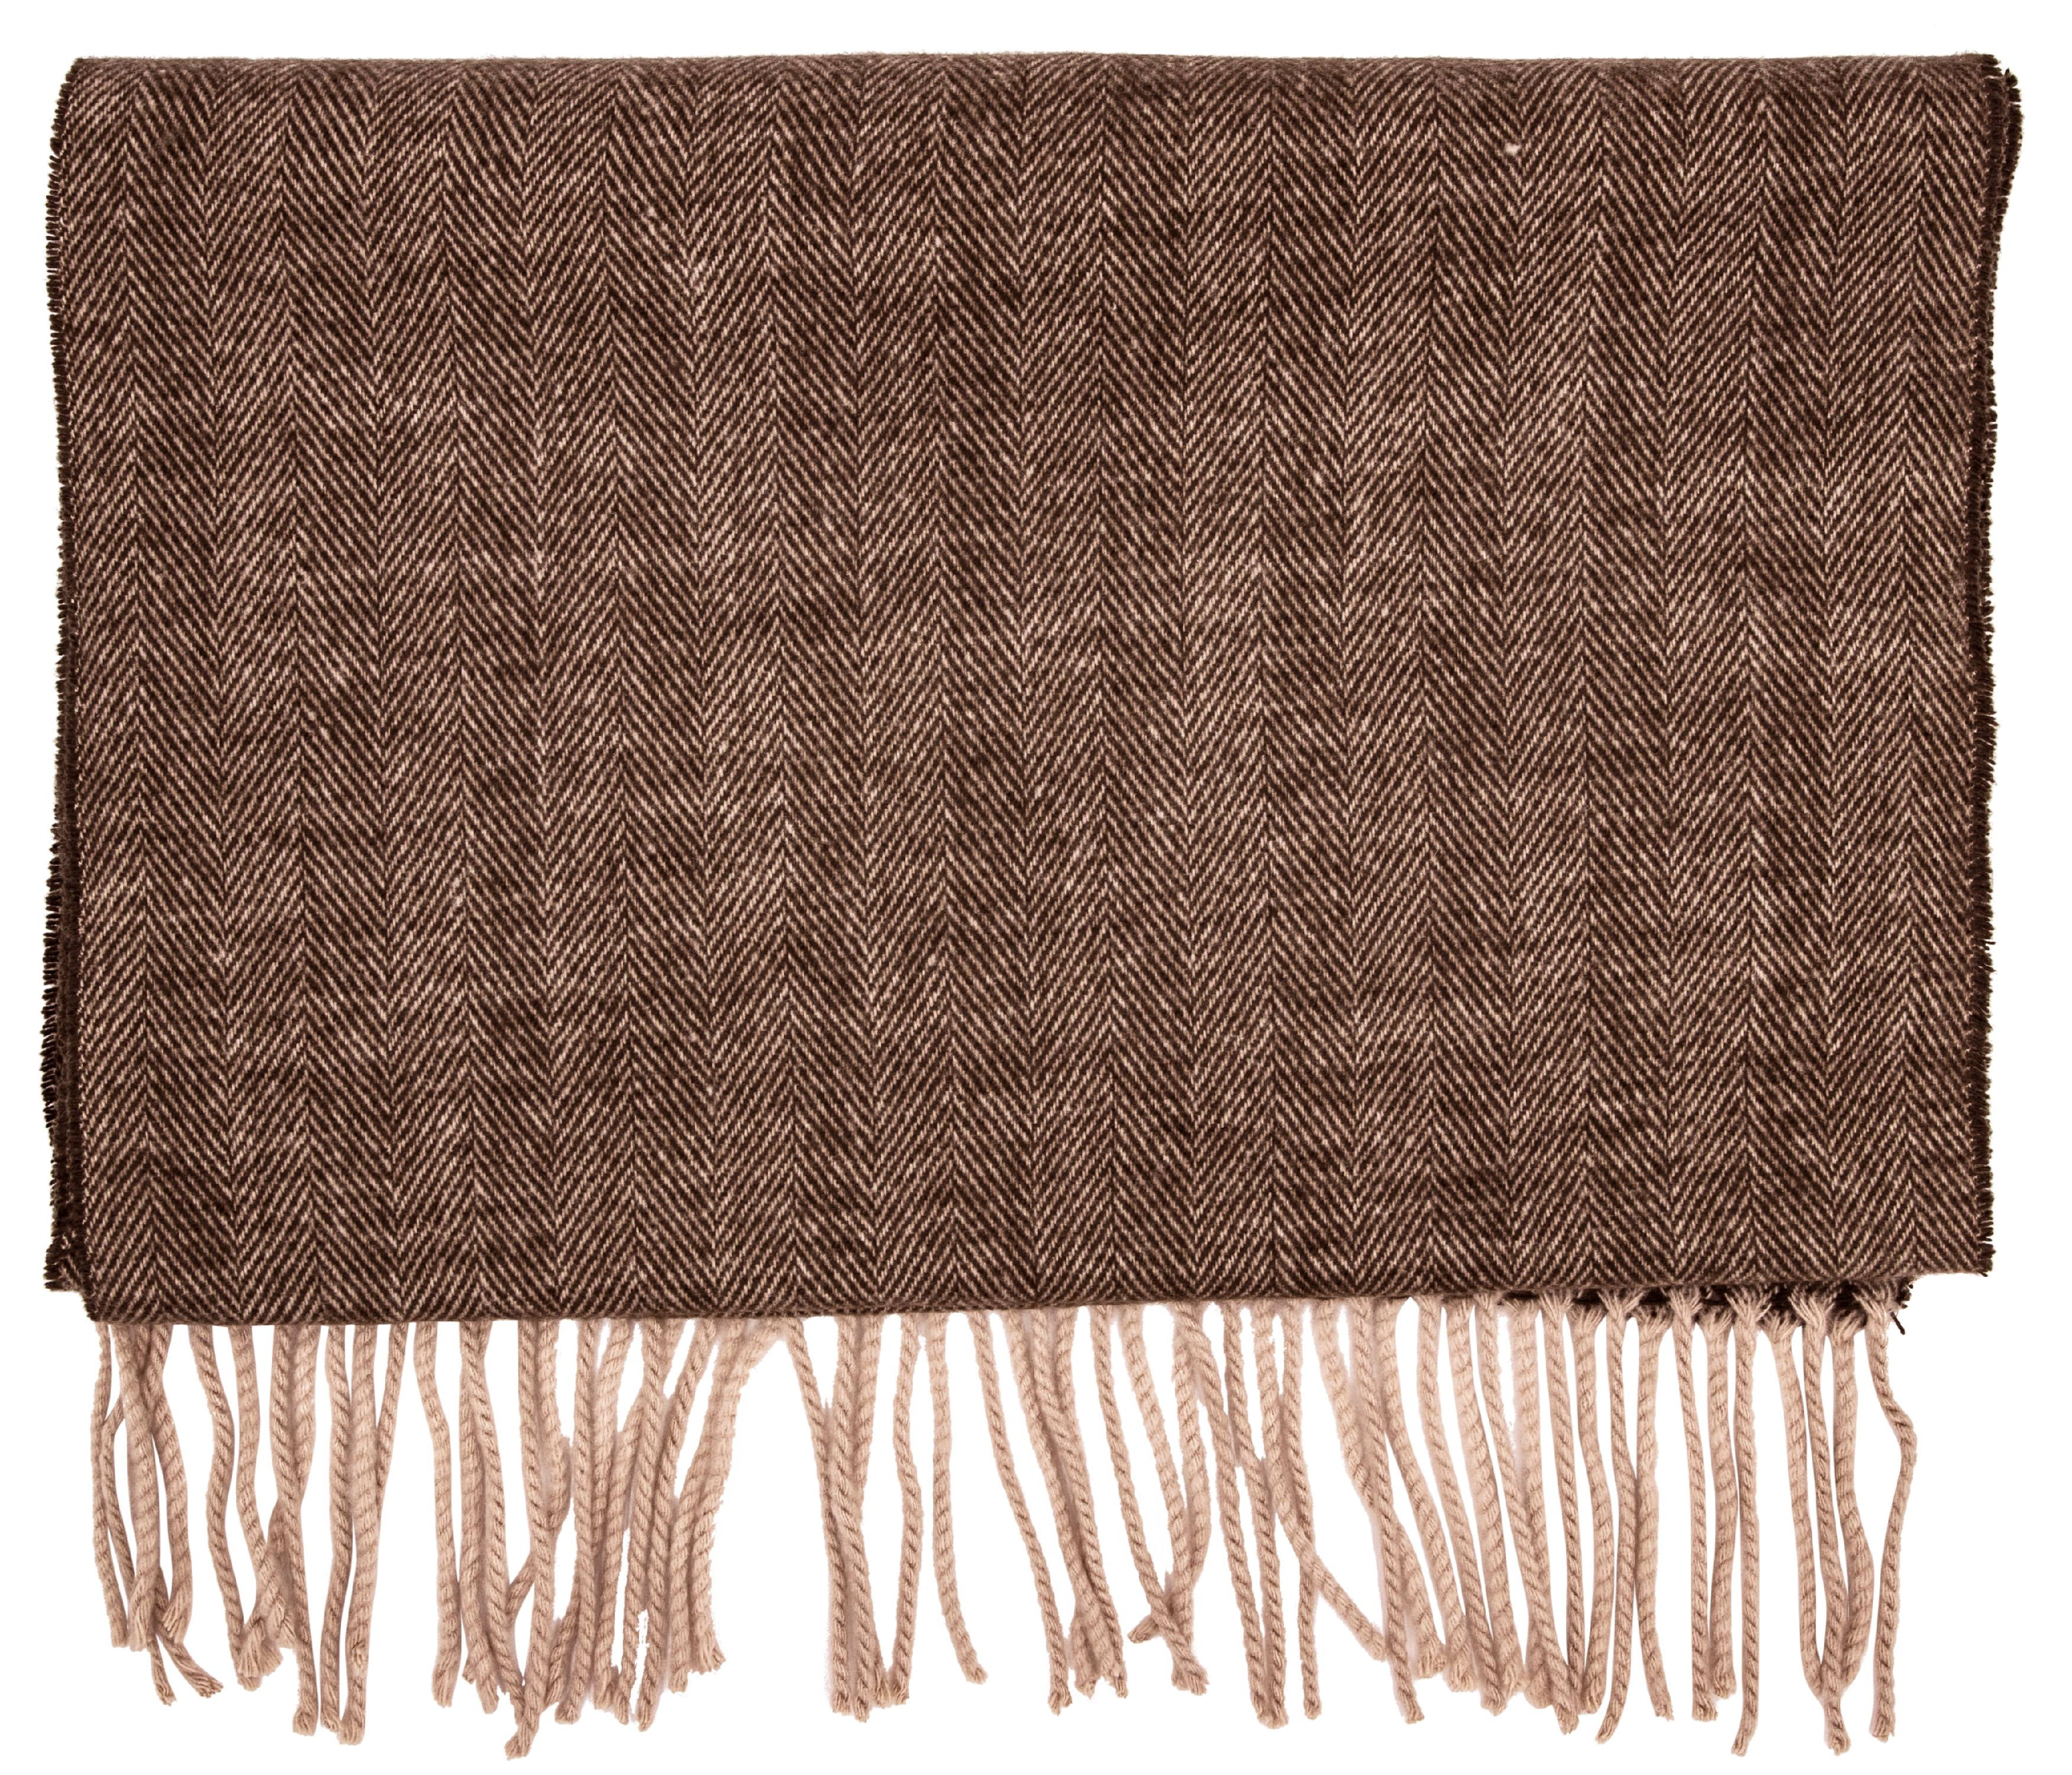 Cashmere Feel Classic Scarf Brown/Tan 12-pack [#54557] - $32.00